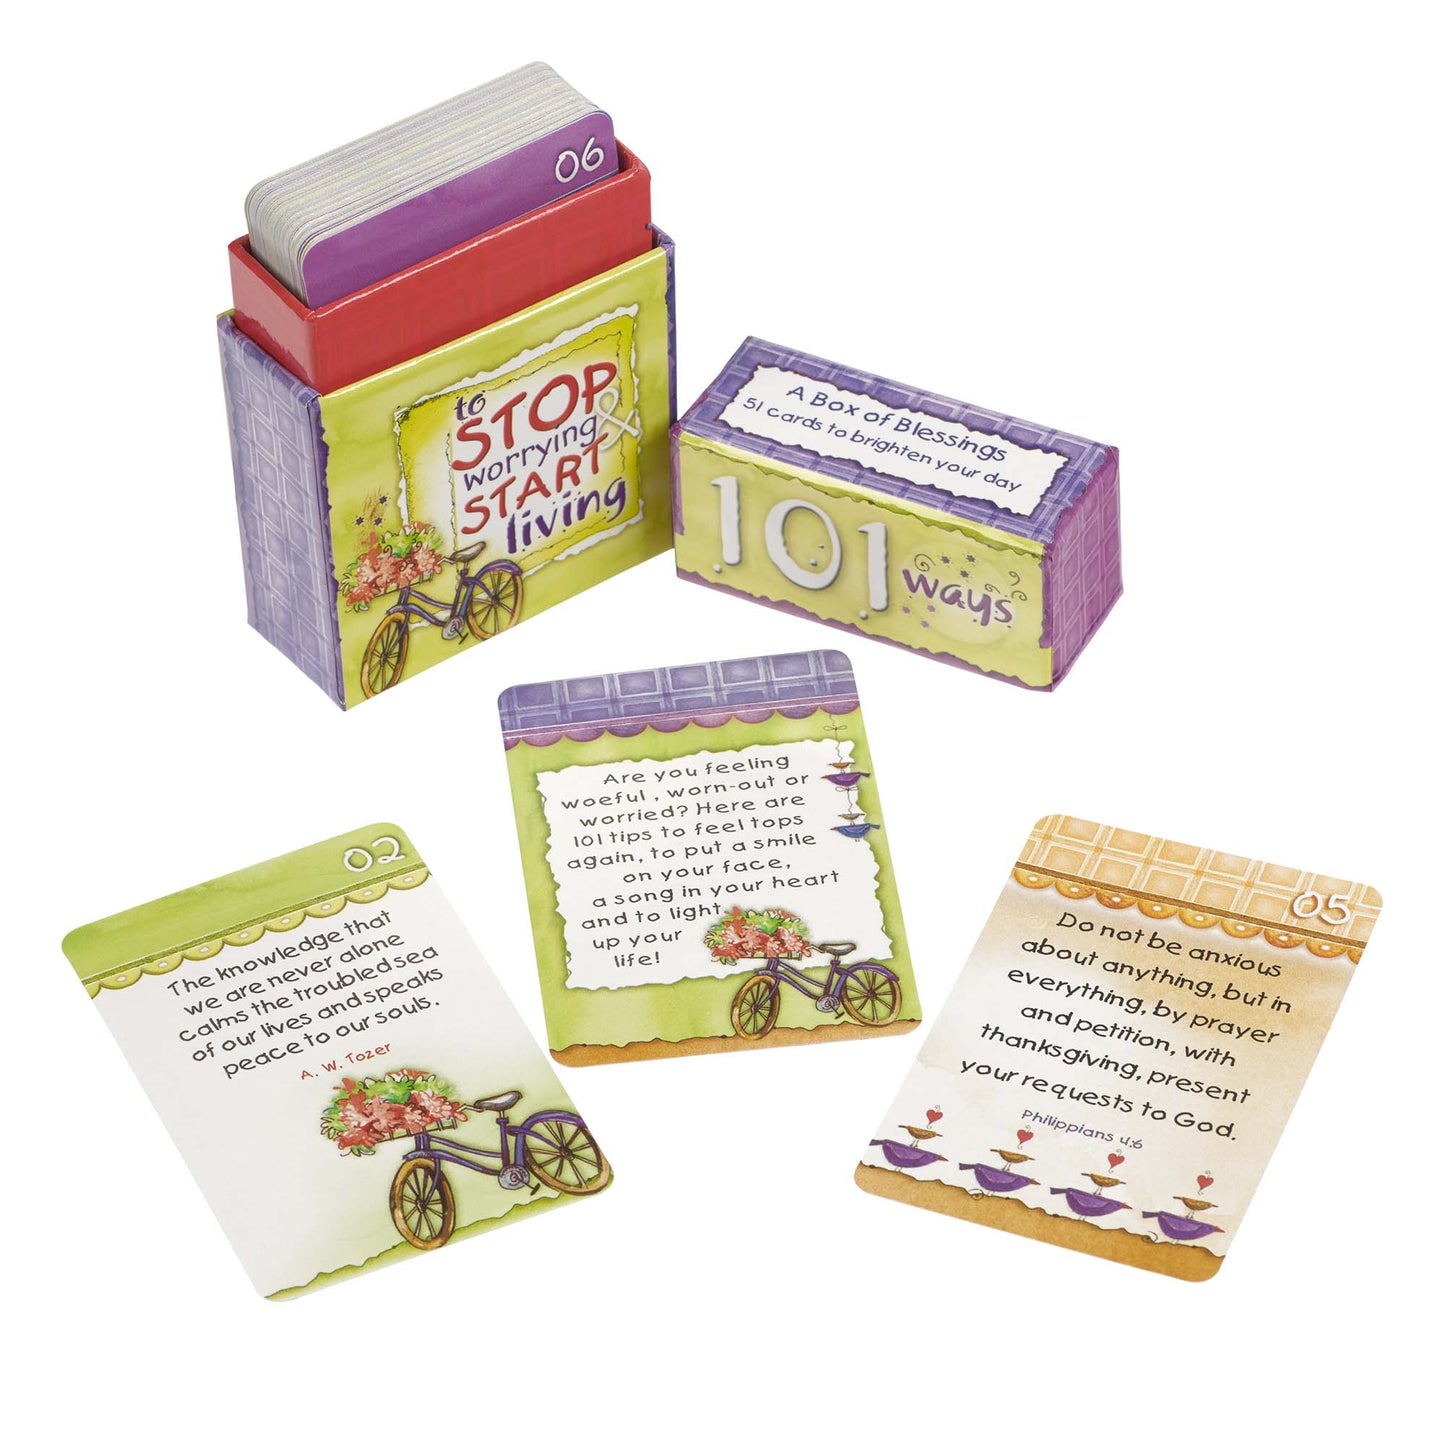 101 Ways to Stop Worrying & Start Living Box of Blessings - The Christian Gift Company